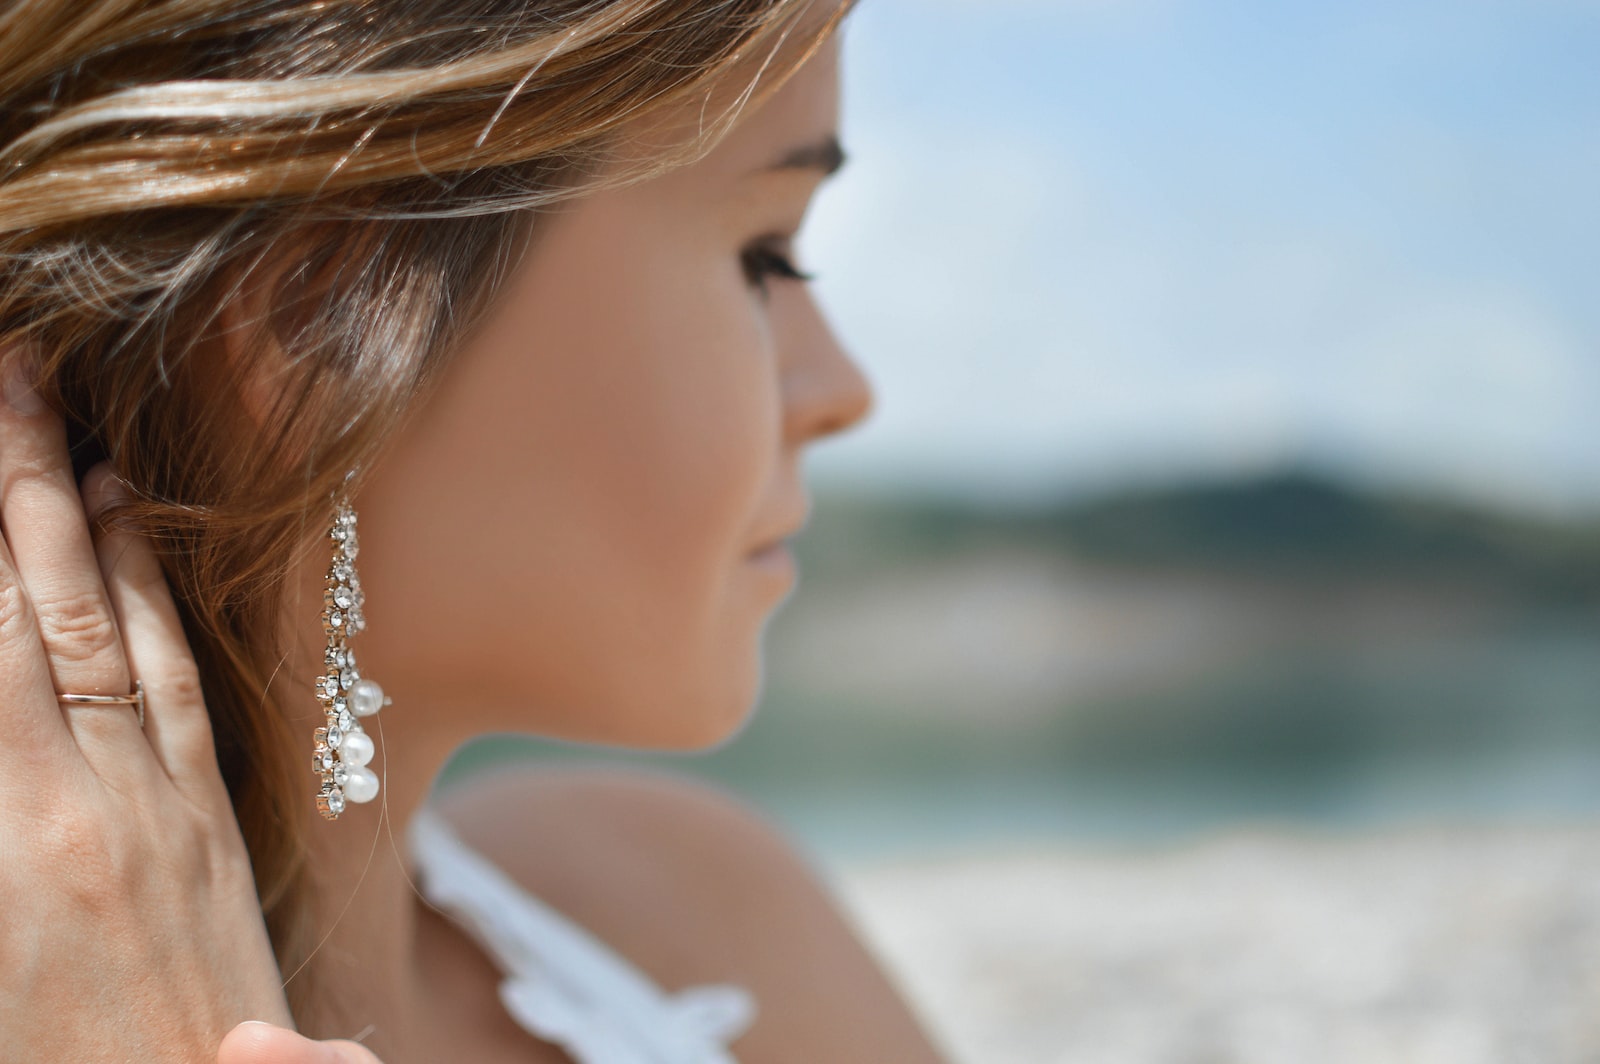 shallow focus photography of woman wearing dangling earrings holding her hair near mountain